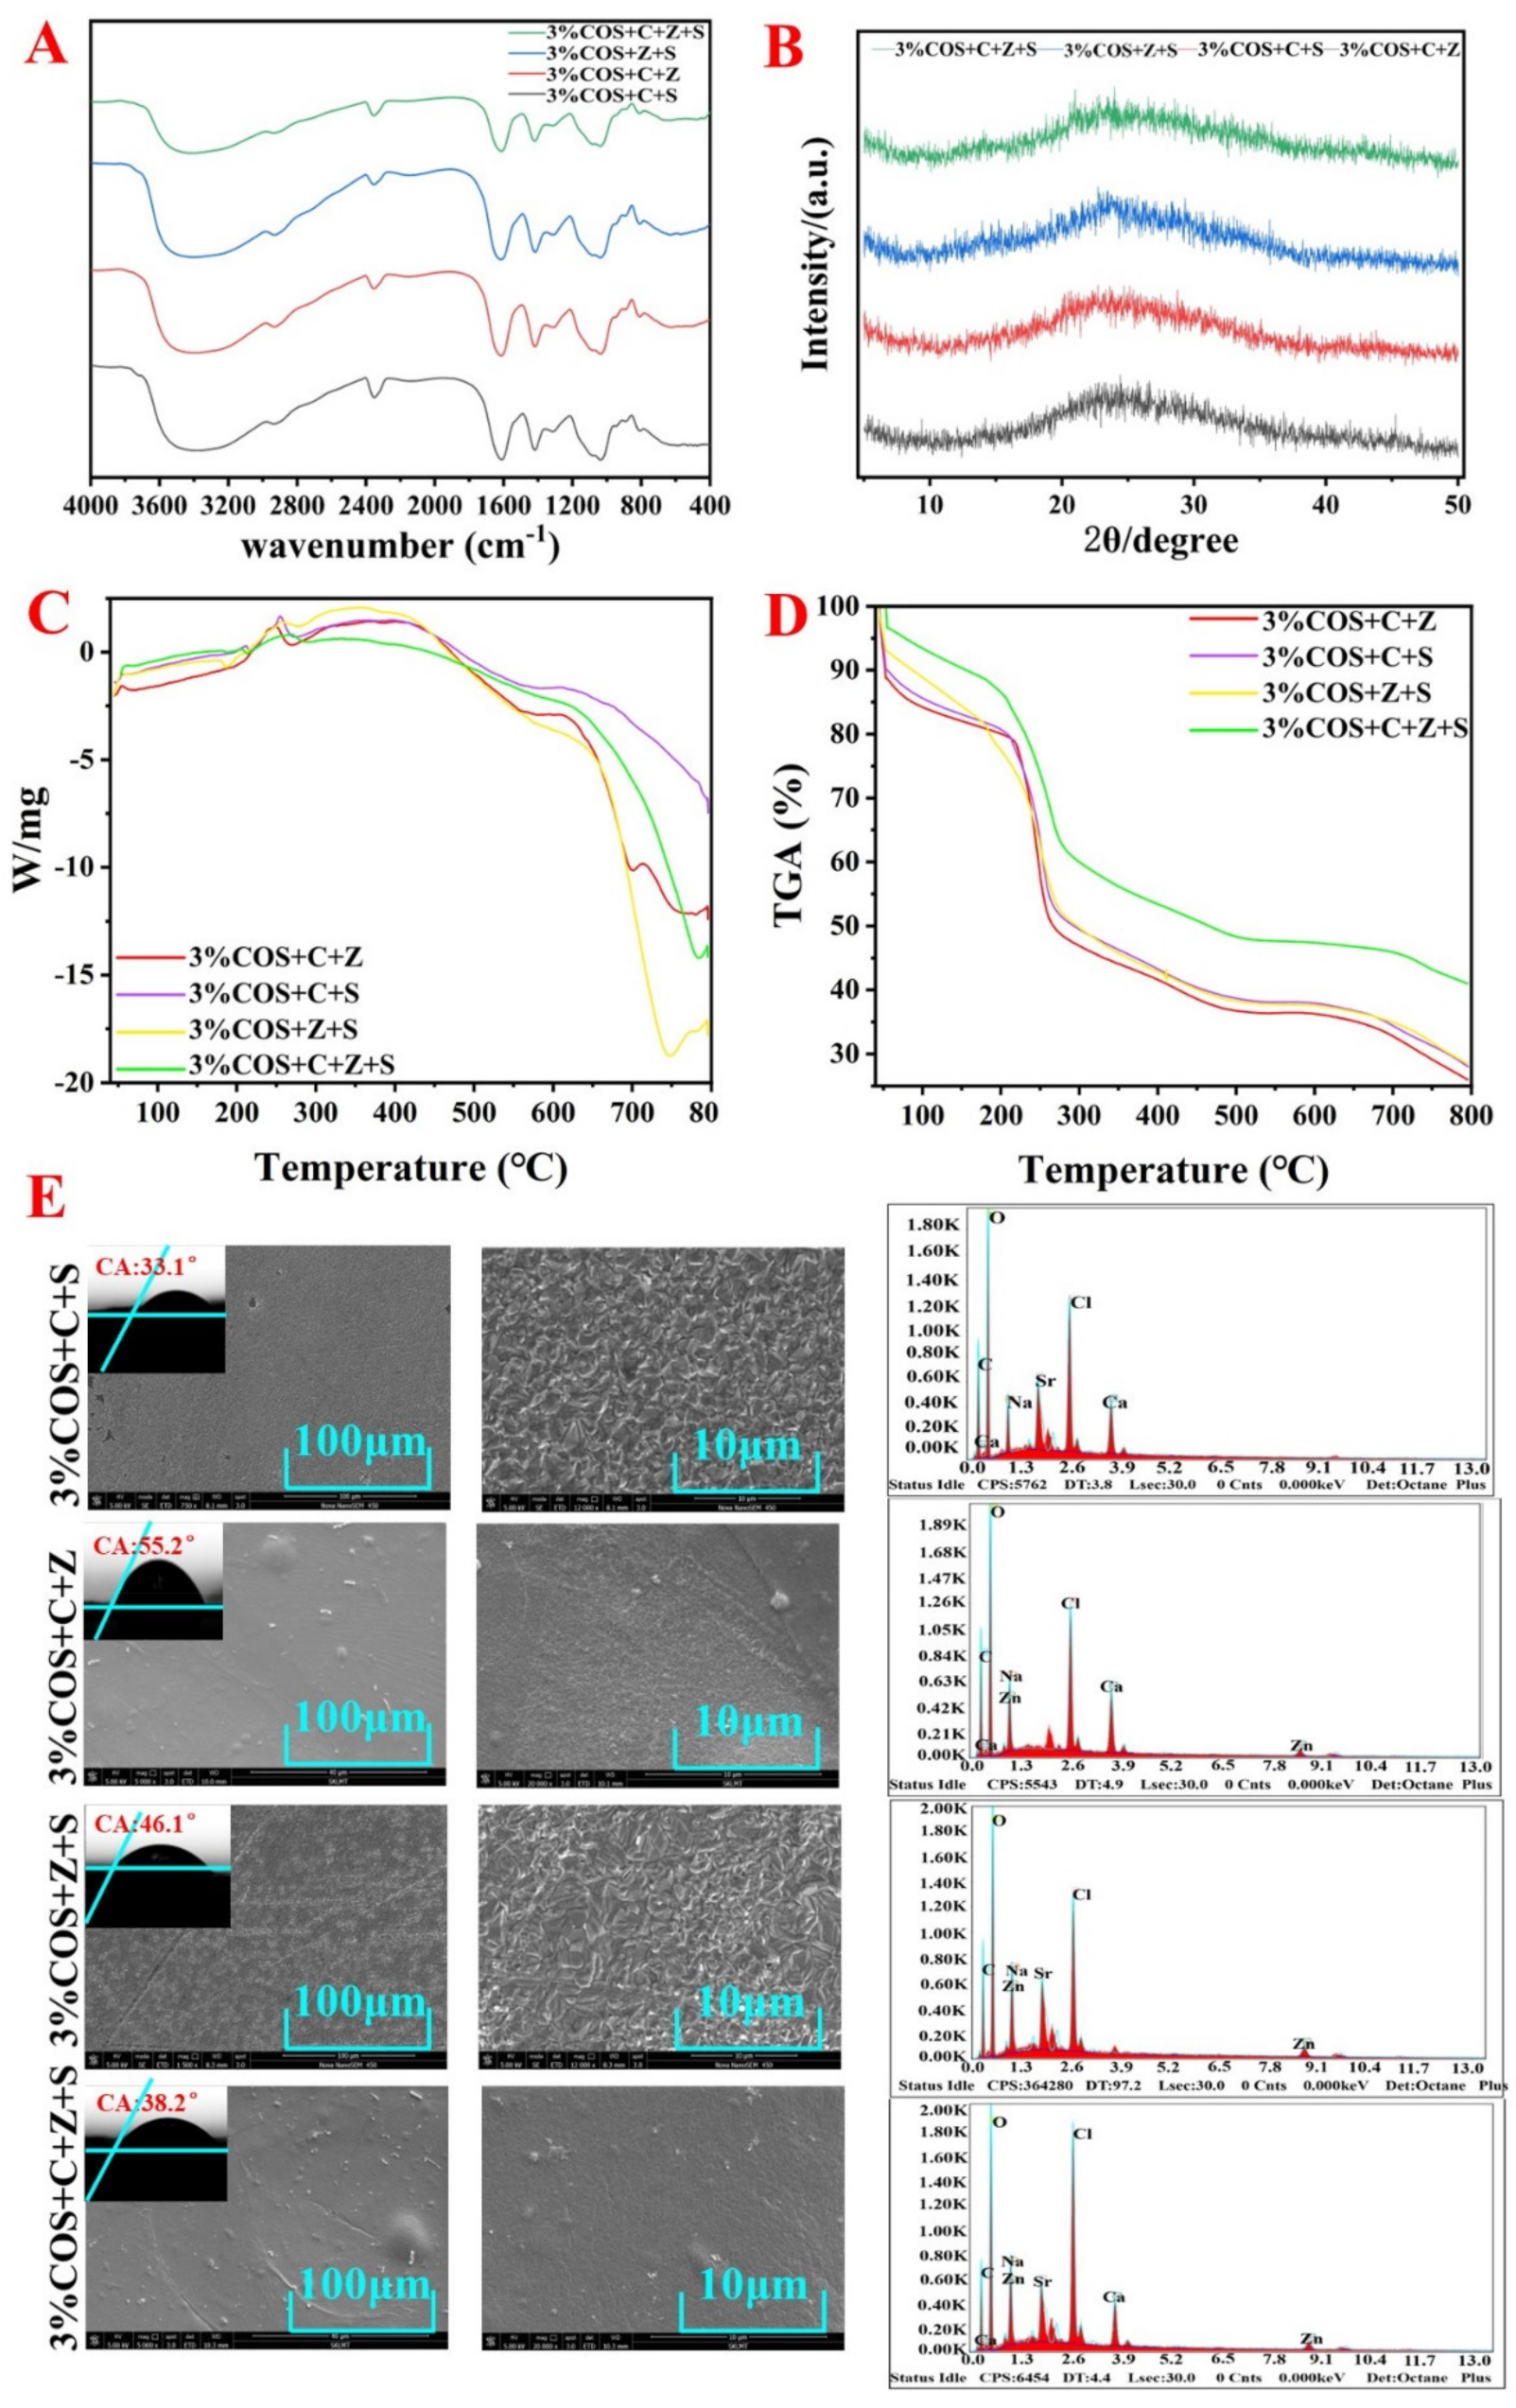 Pharmaceuticals | Free Full-Text | Multifunctional Gel Films of Marine  Polysaccharides Cross-Linked with Poly-Metal Ions for Wound Healing